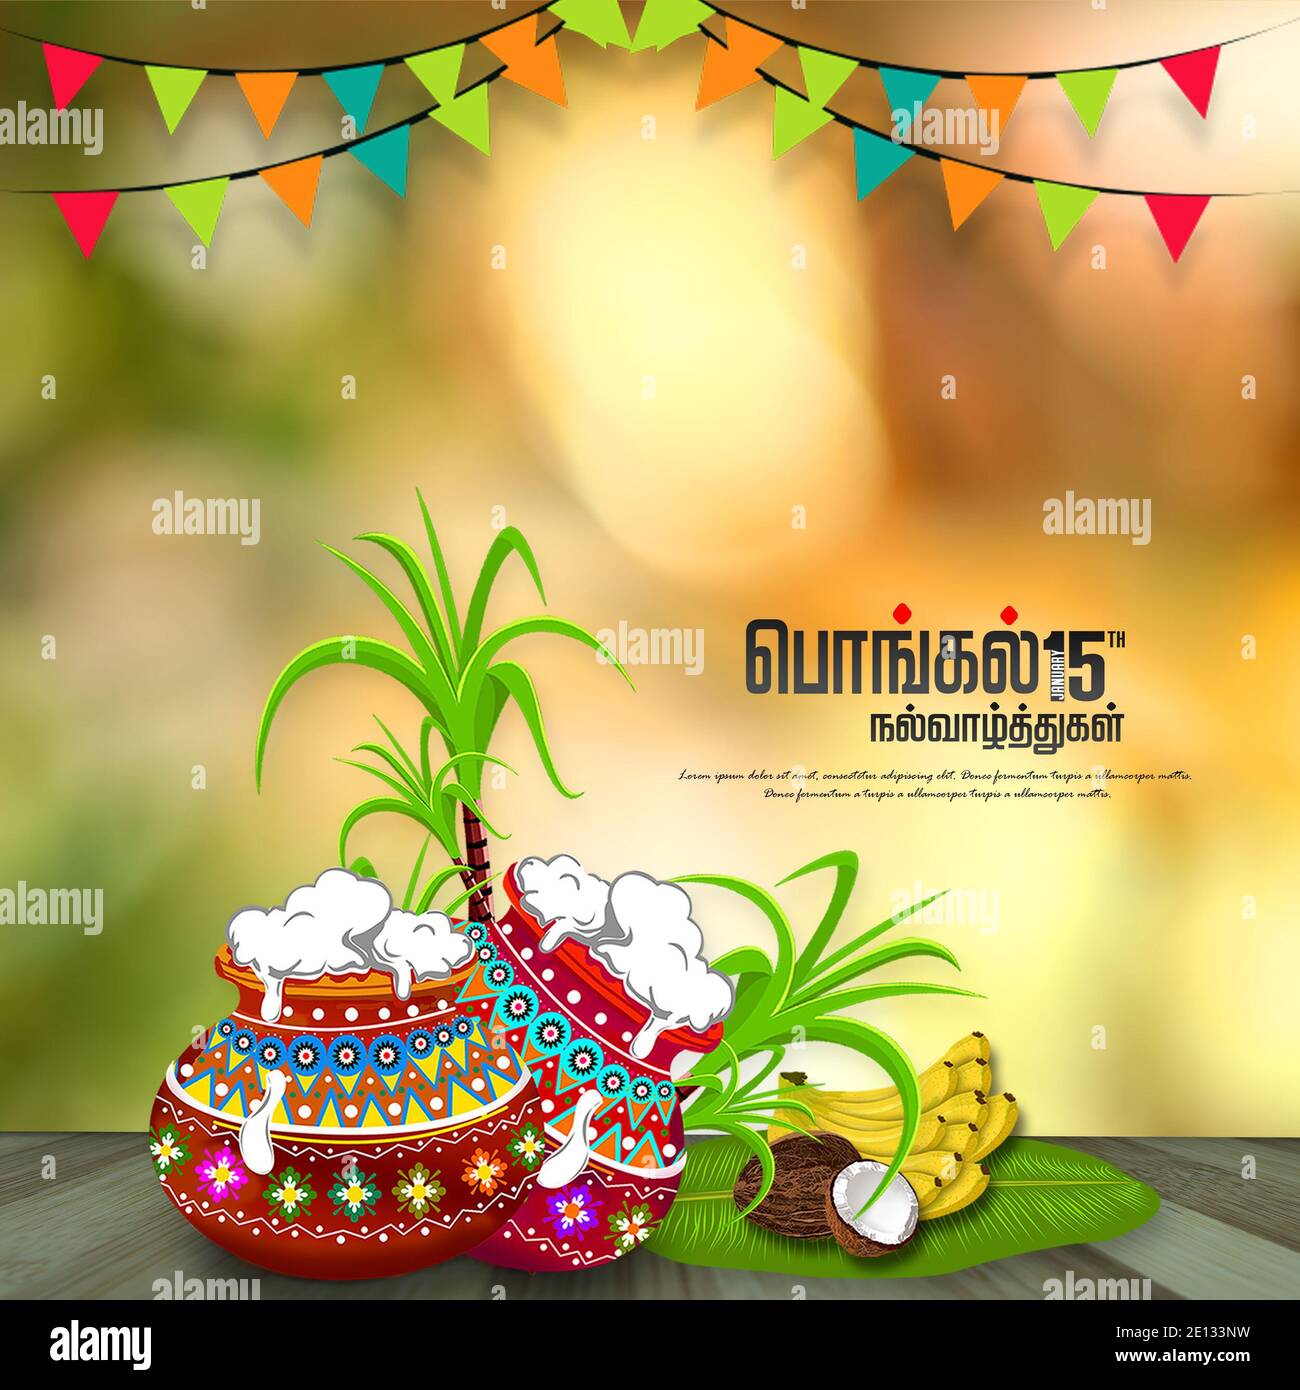 Happy Pongal Background Template Design - Pongal Festival Background  Template Stock Photo - Alamy